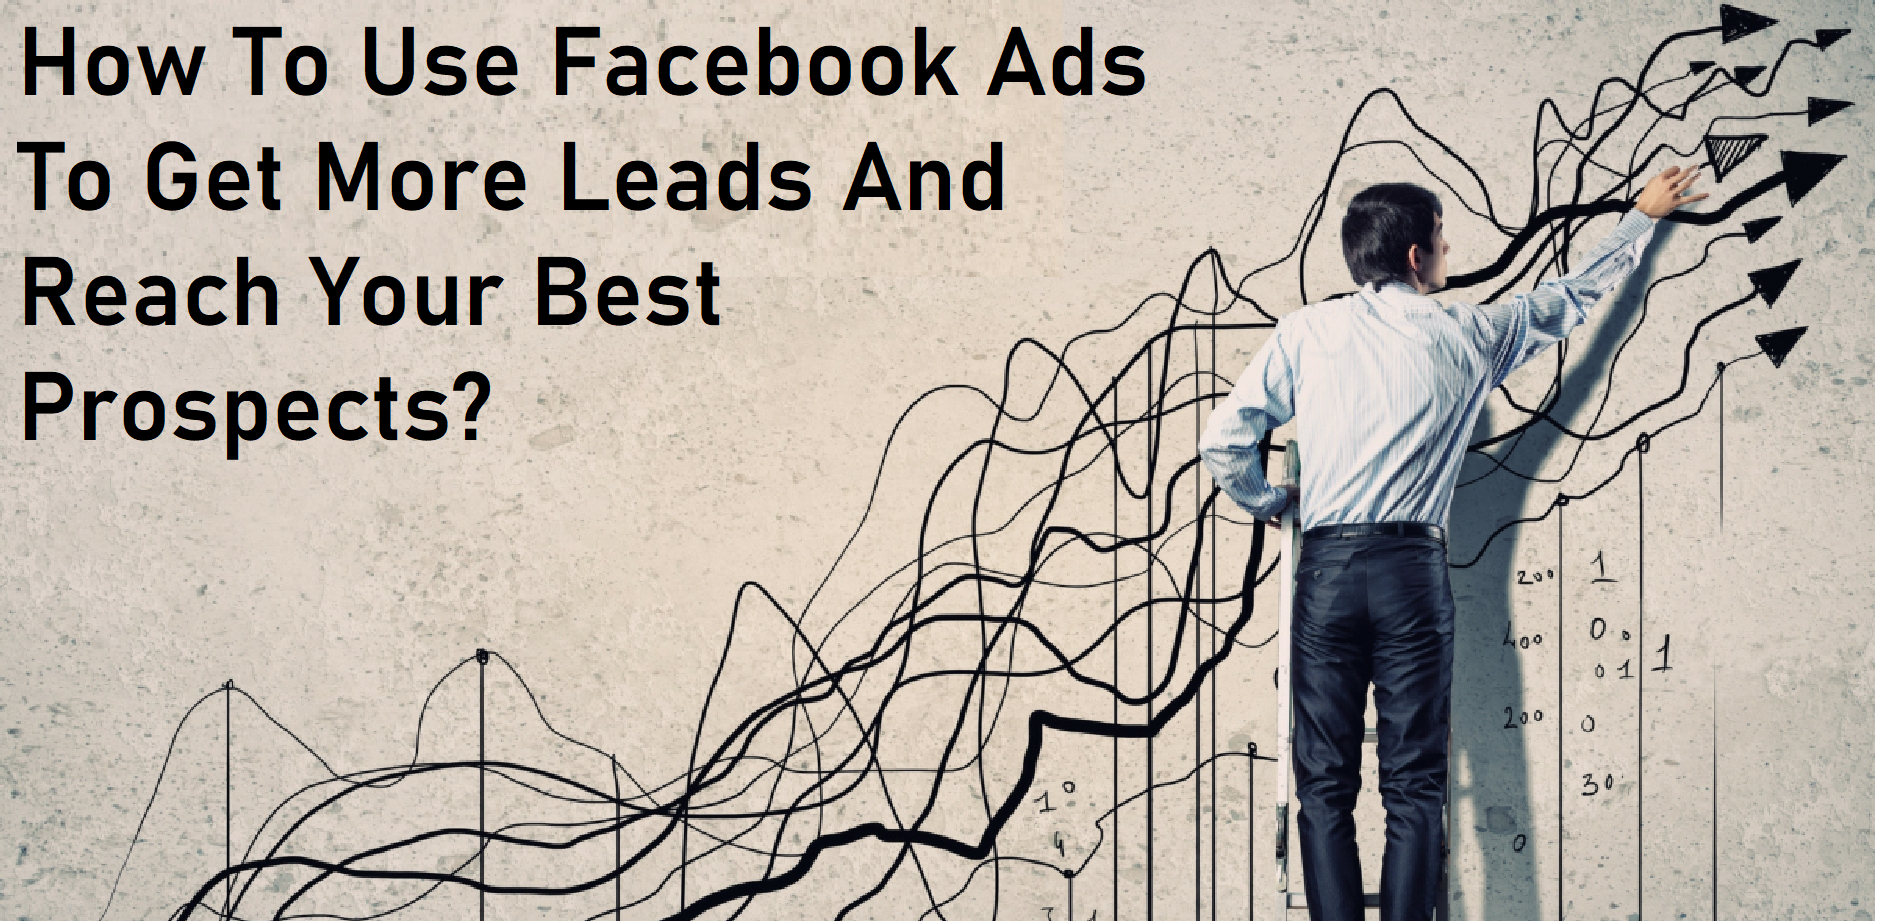 How To Use Facebook Ads To Get More Leads And Reach Your Best Prospects written, a man showing a graph going up